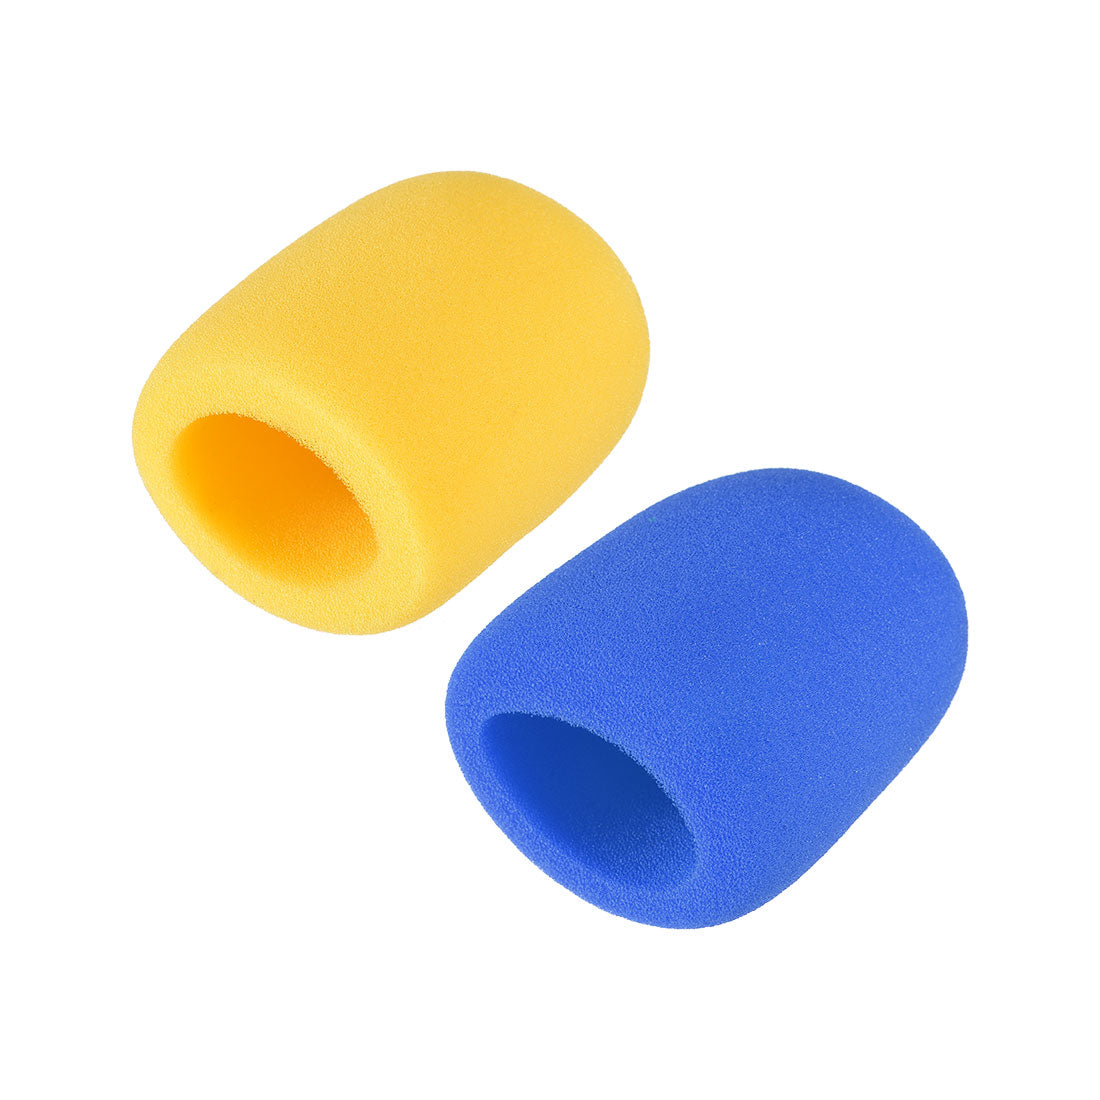 uxcell Uxcell 2PCS Thicken Sponge Foam Mic Cover Handheld Microphone Windscreen Blue Yellow for KTV